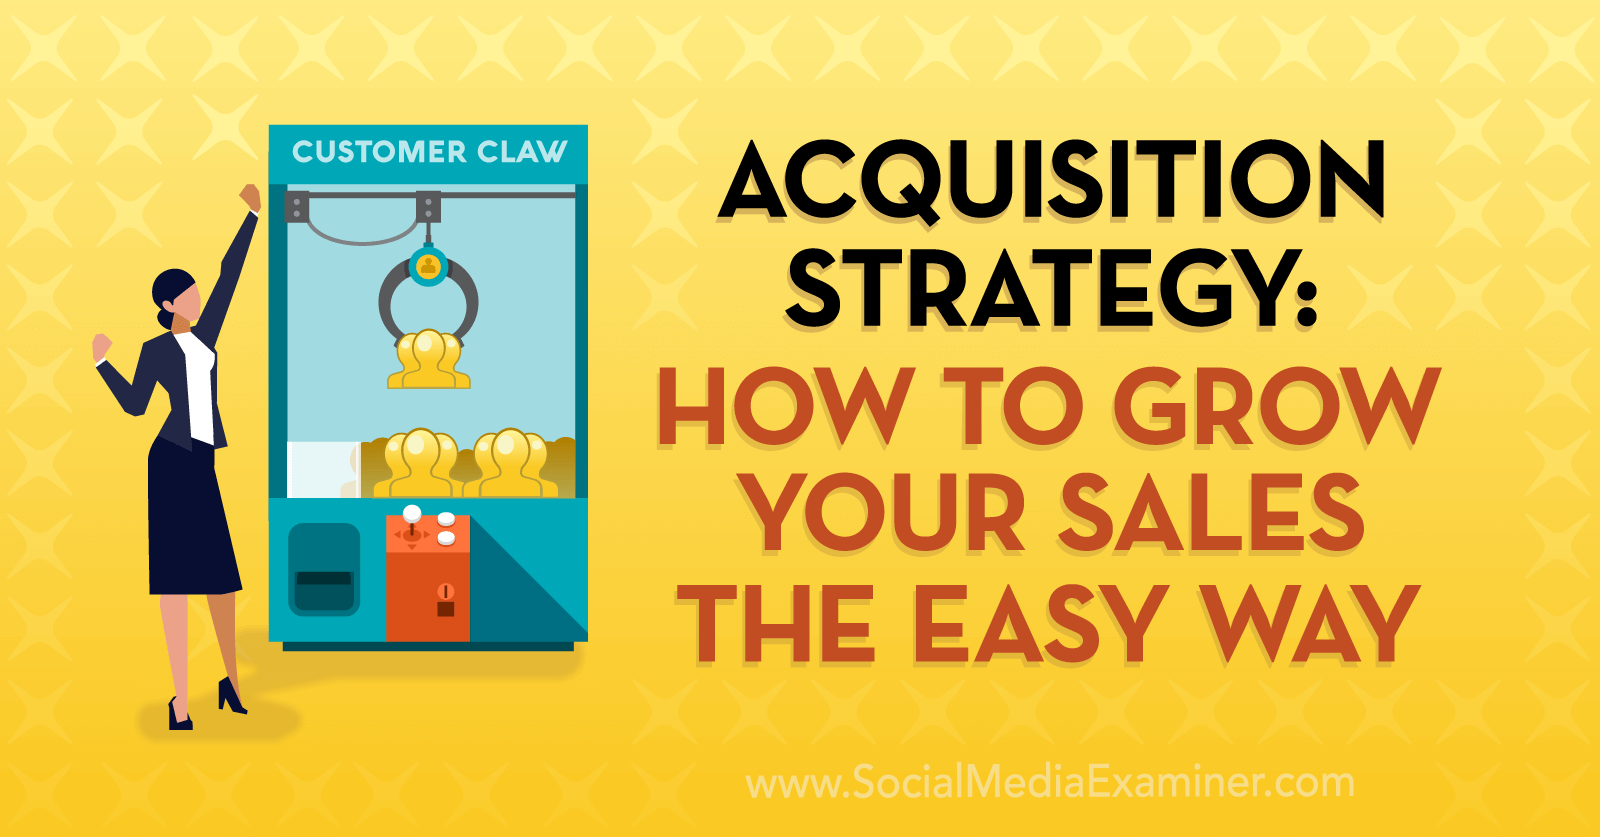 Acquisition Strategy: How to Grow Your Sales the Easy Way by Social Media Examiner